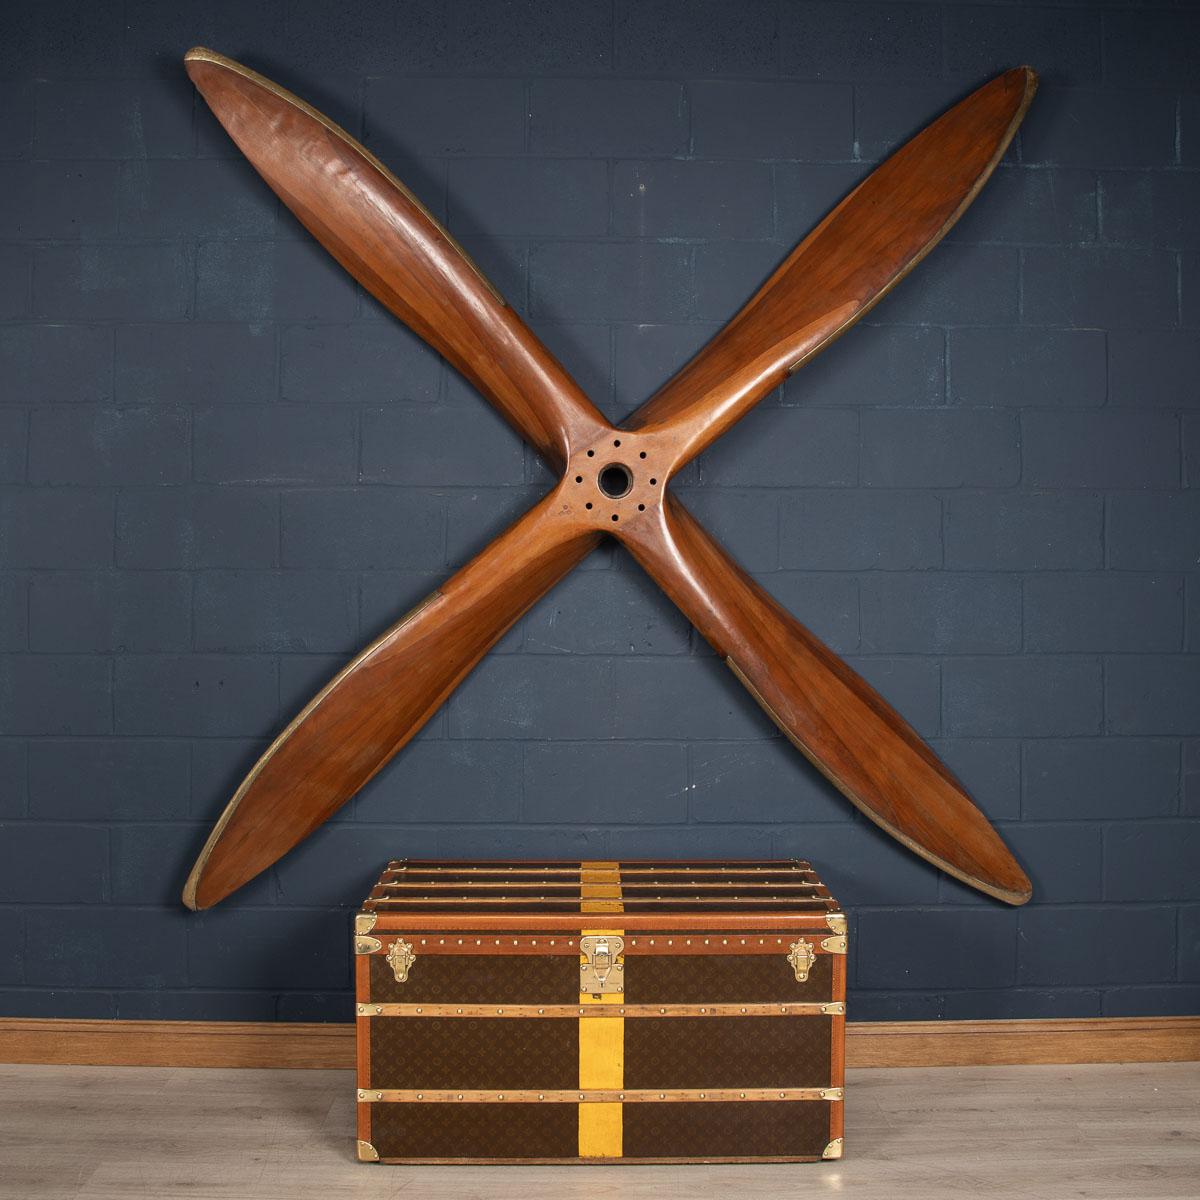 An extremely rare four-blade propeller from a Vickers Vernon aircraft. The Vickers Vernon was a British biplane troop carrier used by the Royal Air Force. It entered service in 1921, and was the first dedicated troop transport of the RAF. The Vernon